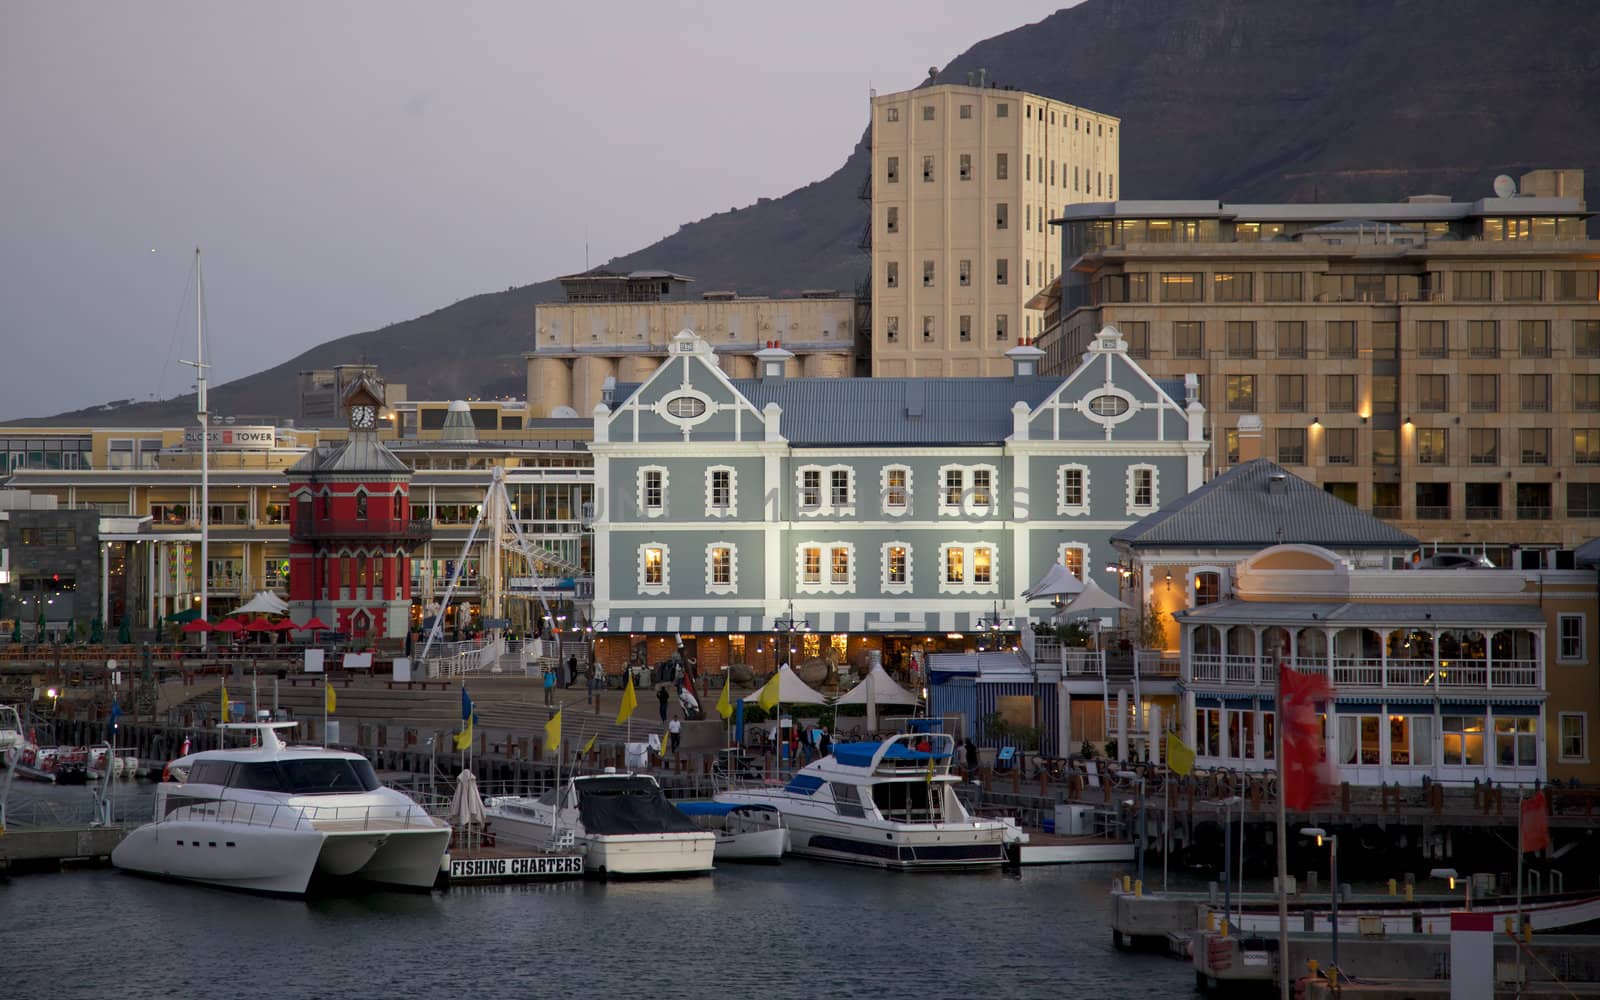 The Victoria and Alfred Waterfront, Cape Town, South Africa.